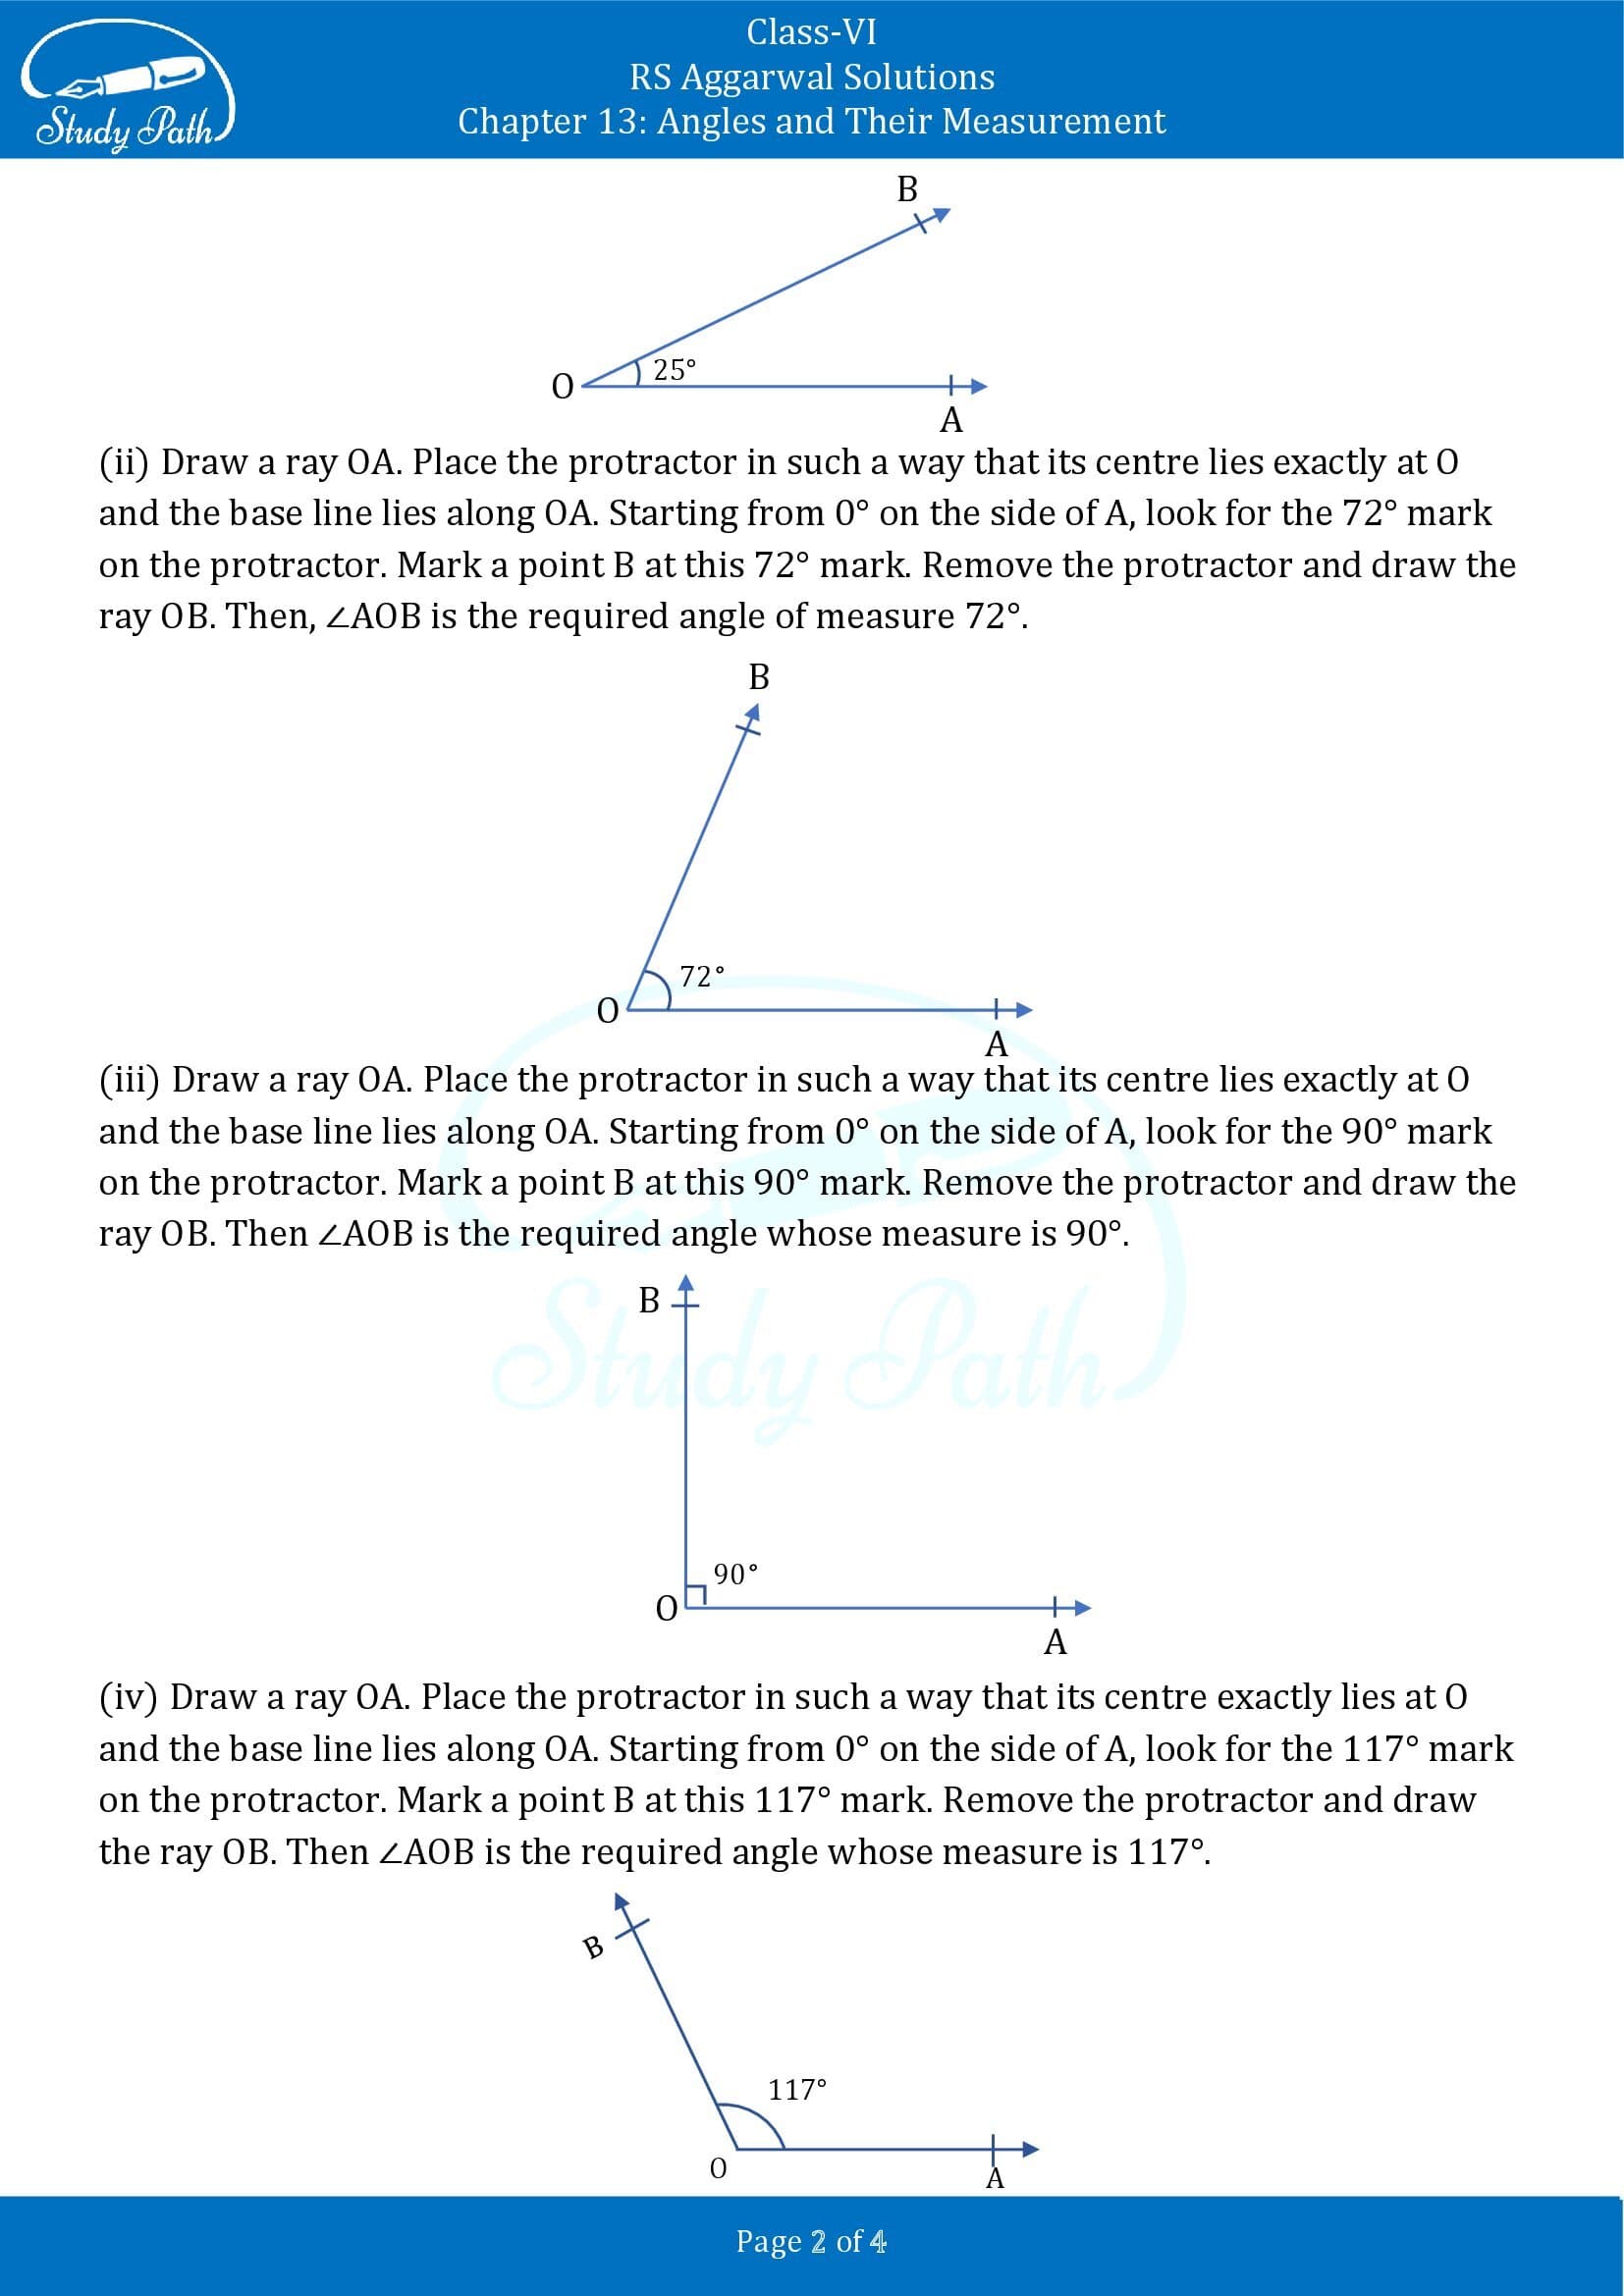 RS Aggarwal Solutions Class 6 Chapter 13 Angles and Their Measurement Exercise 13C 002